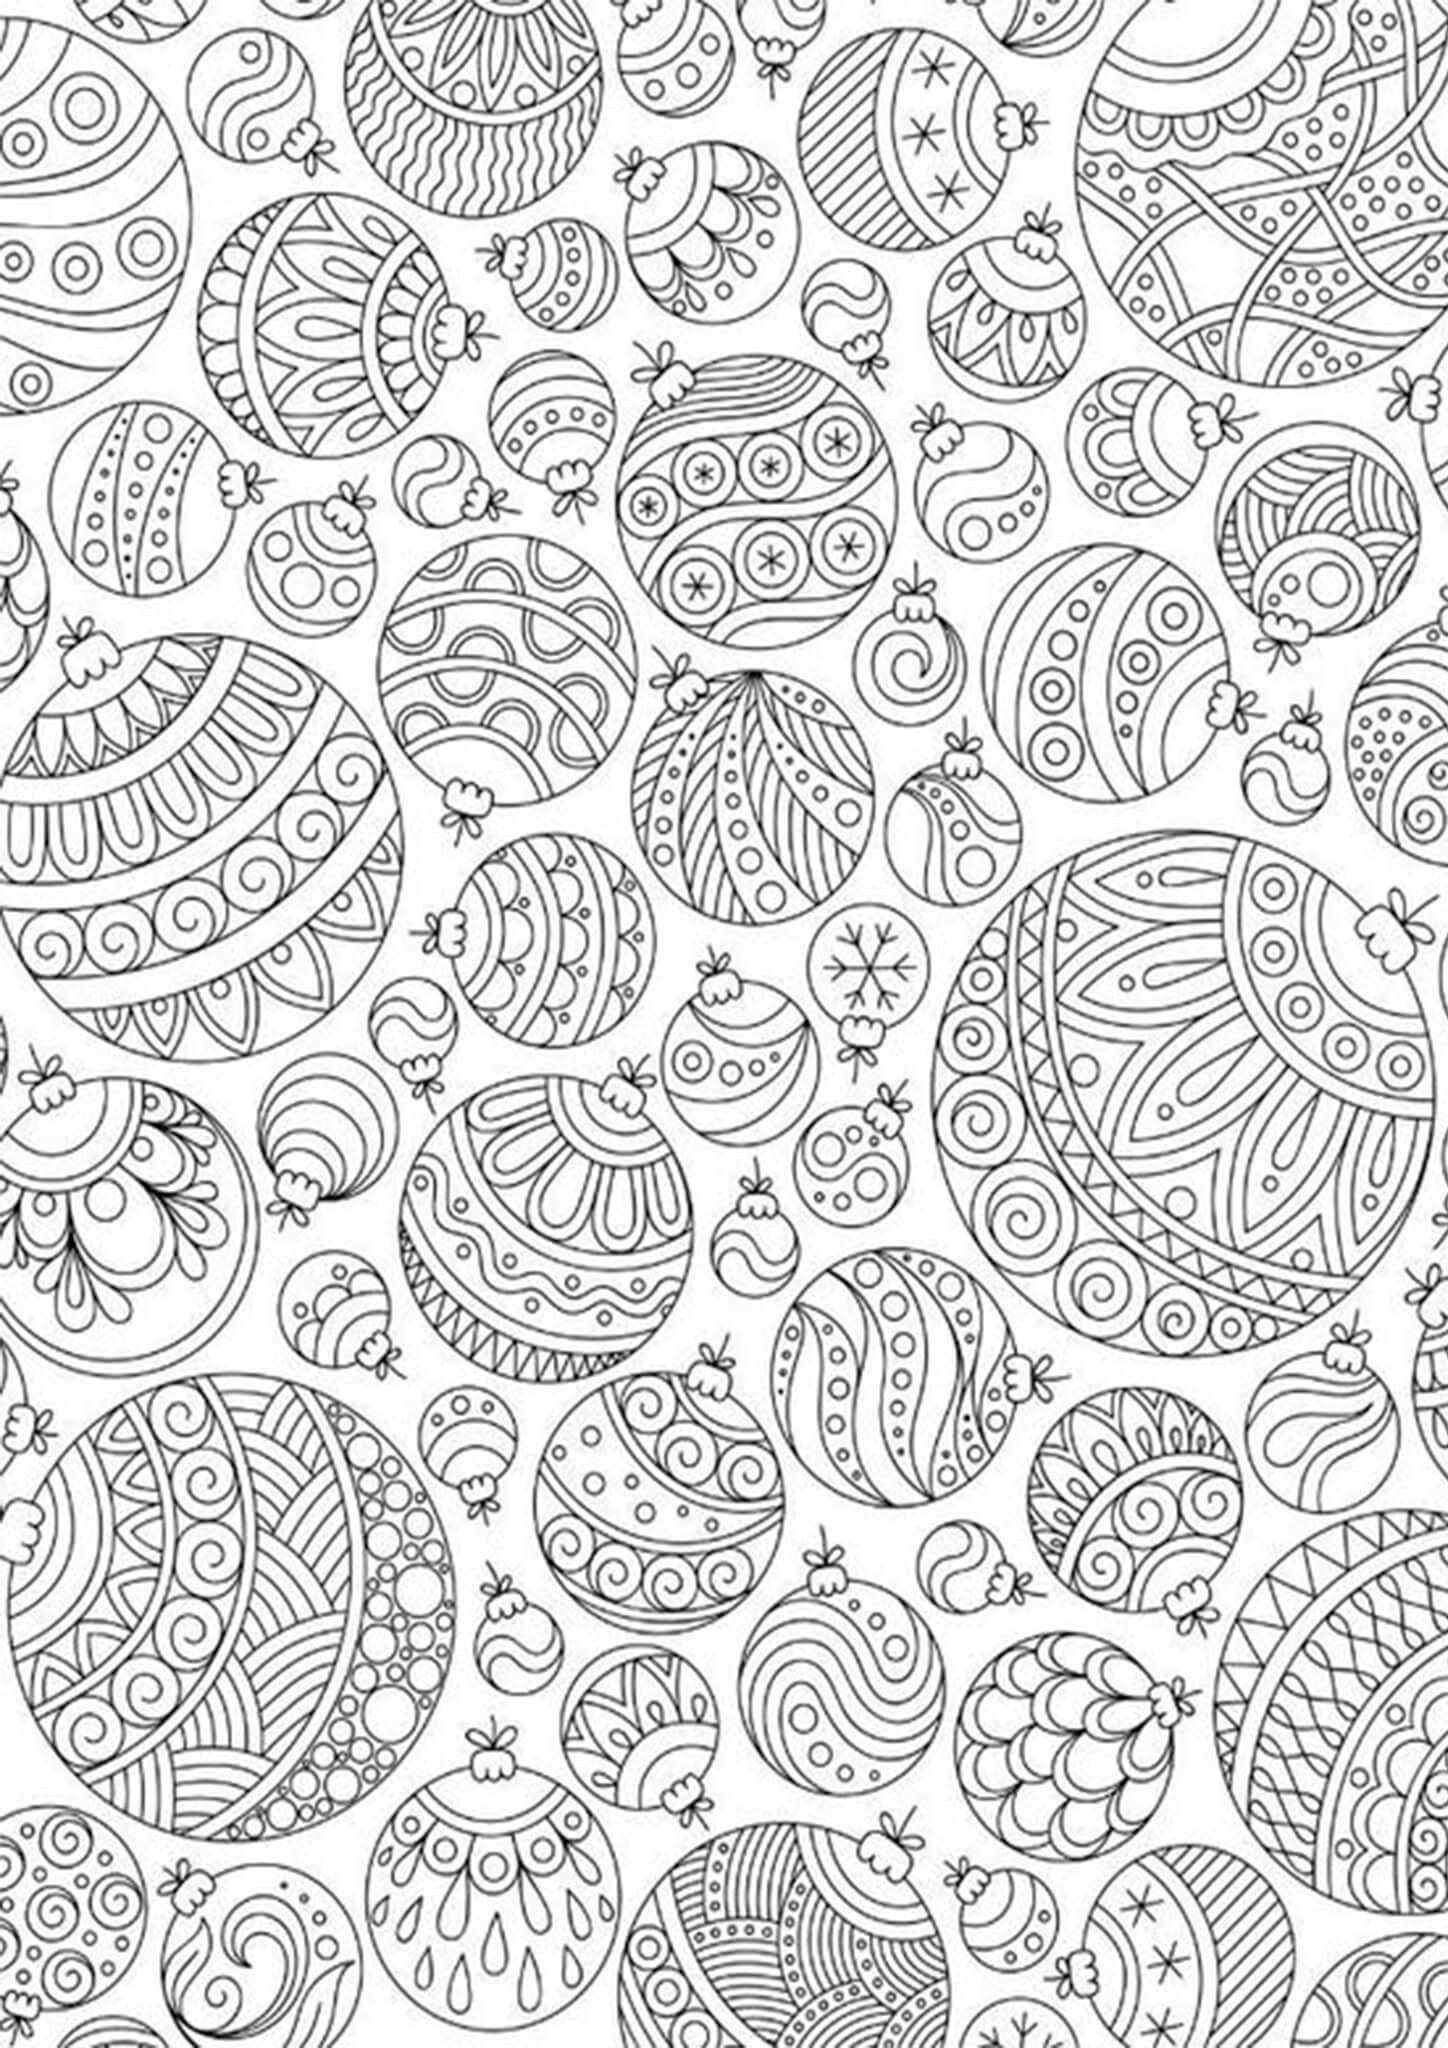 Free & Easy To Print Adult Christmas Coloring Pages   Tulamama